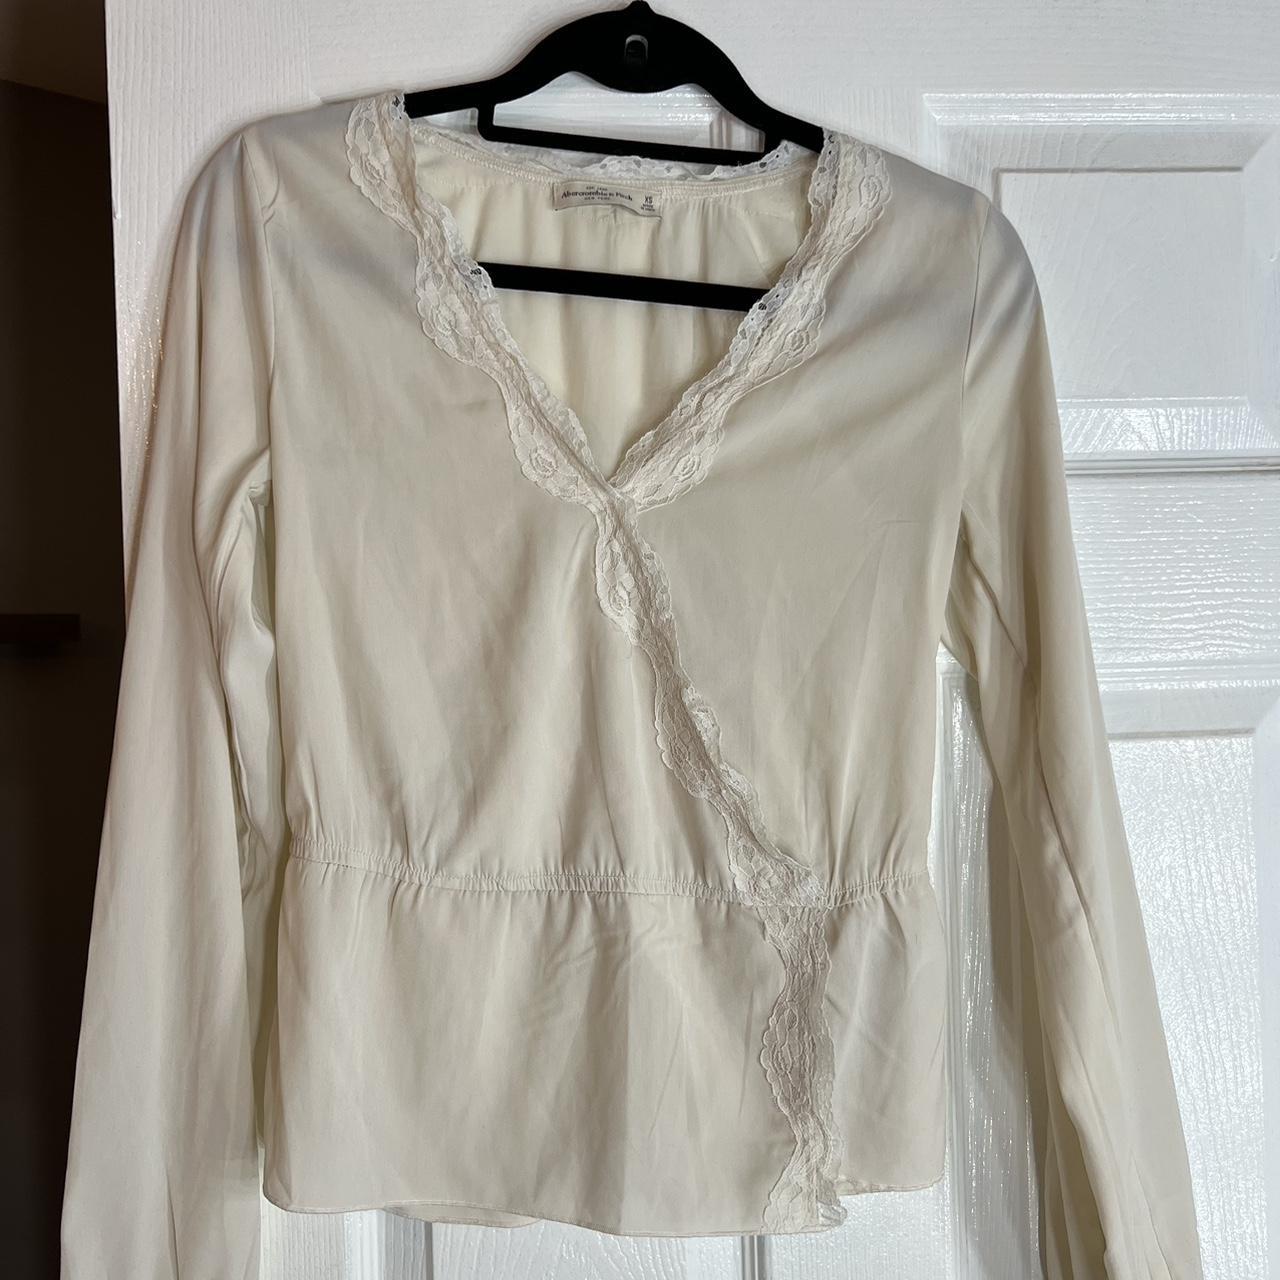 Abercrombie & Fitch Women's White and Cream Blouse | Depop